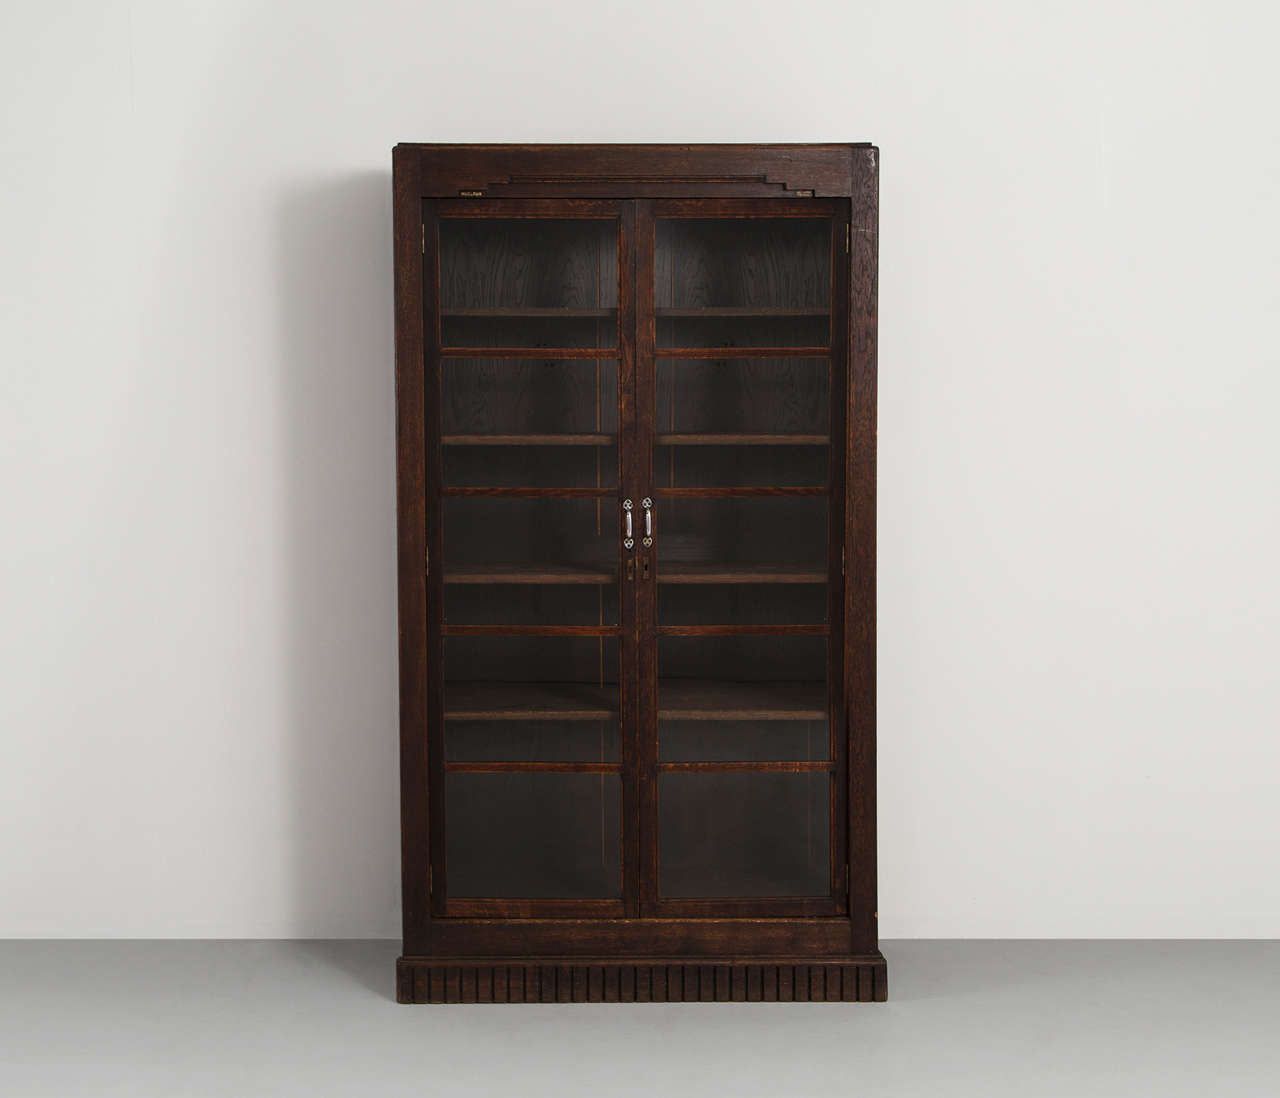 A pair of large showcases / pharmacist closet, with glass door panels.
The piece are made out of stained oak. 

The cabinets provide plenty of storage space due to its four adjustable shelves.
Please note the elegant details in the woodwork,